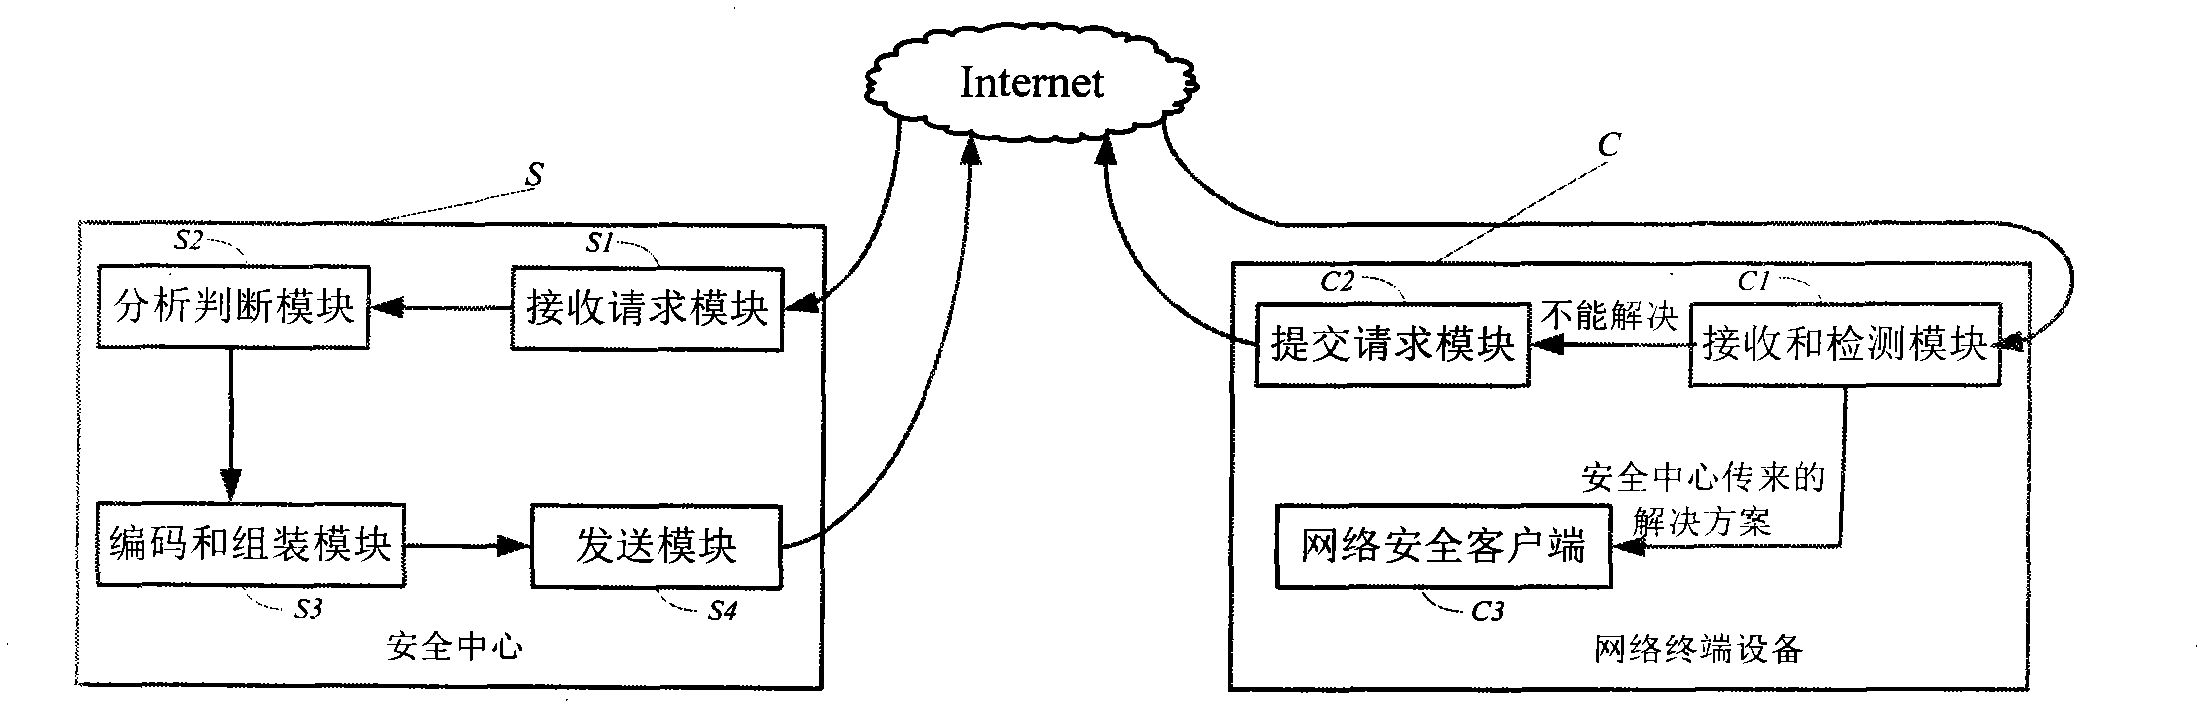 Method for realizing security of network terminal equipment